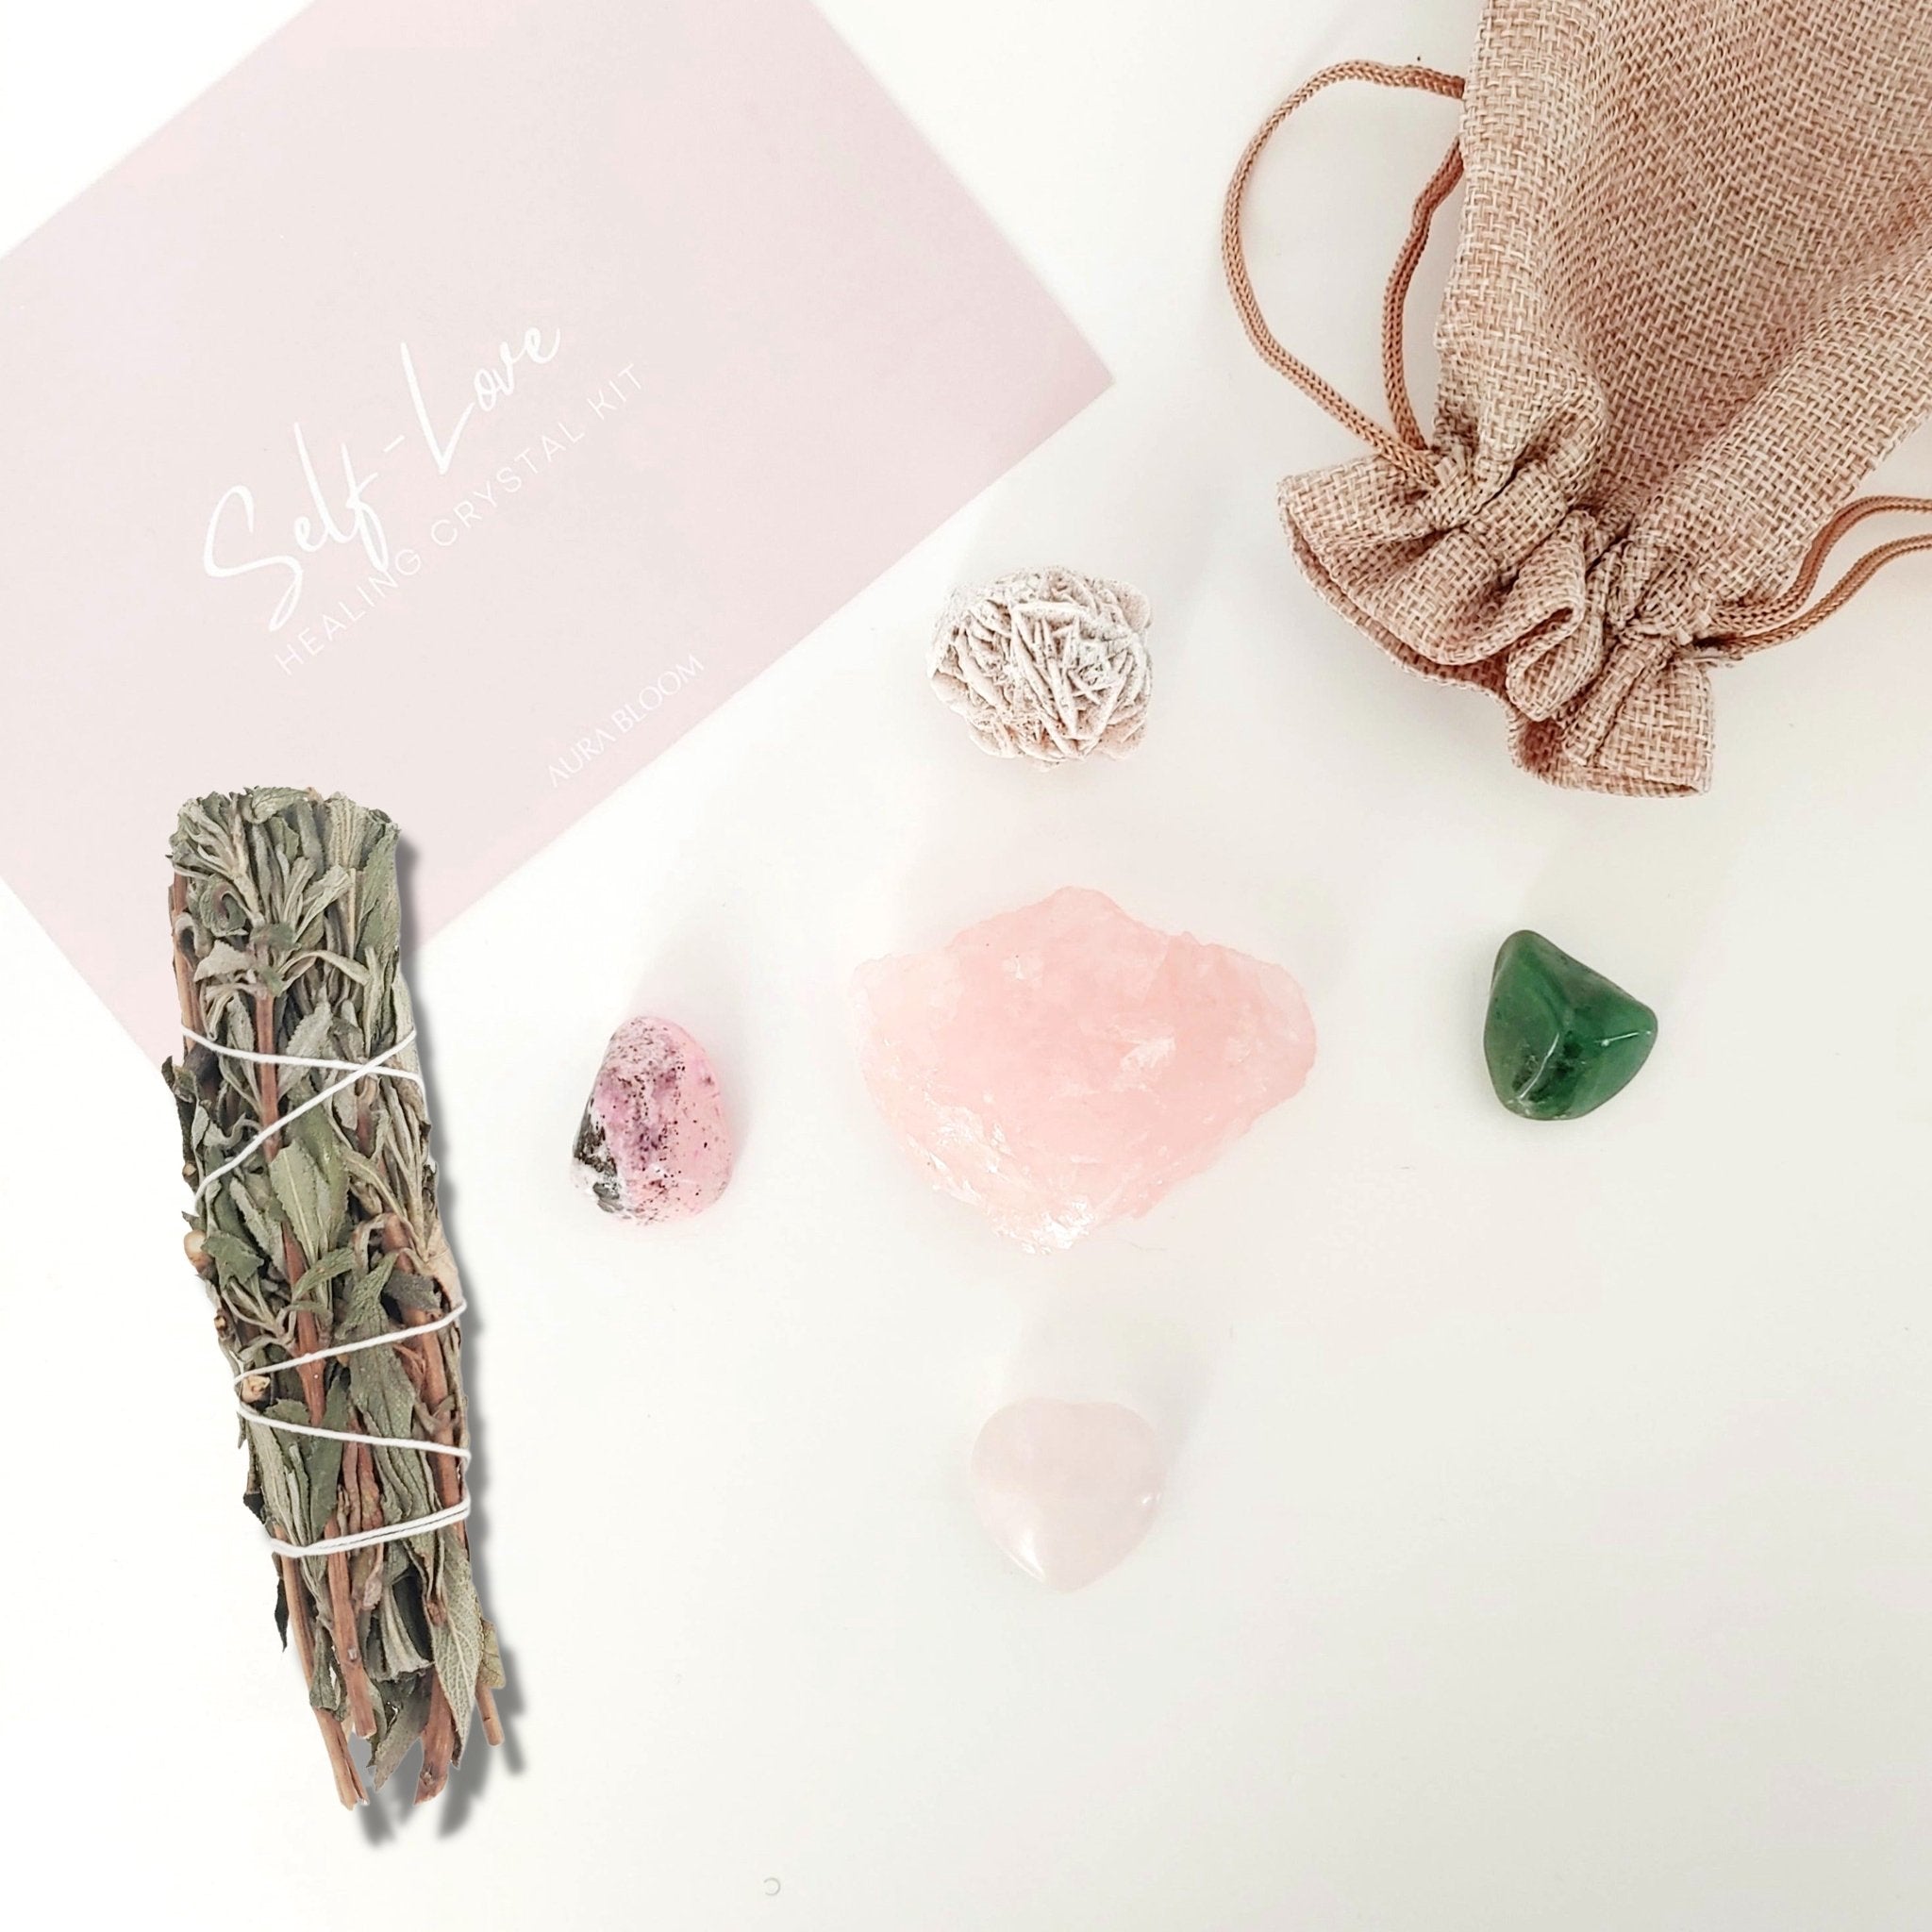 Elevate - The Power of Crystals Kit - Spirituality for Adults